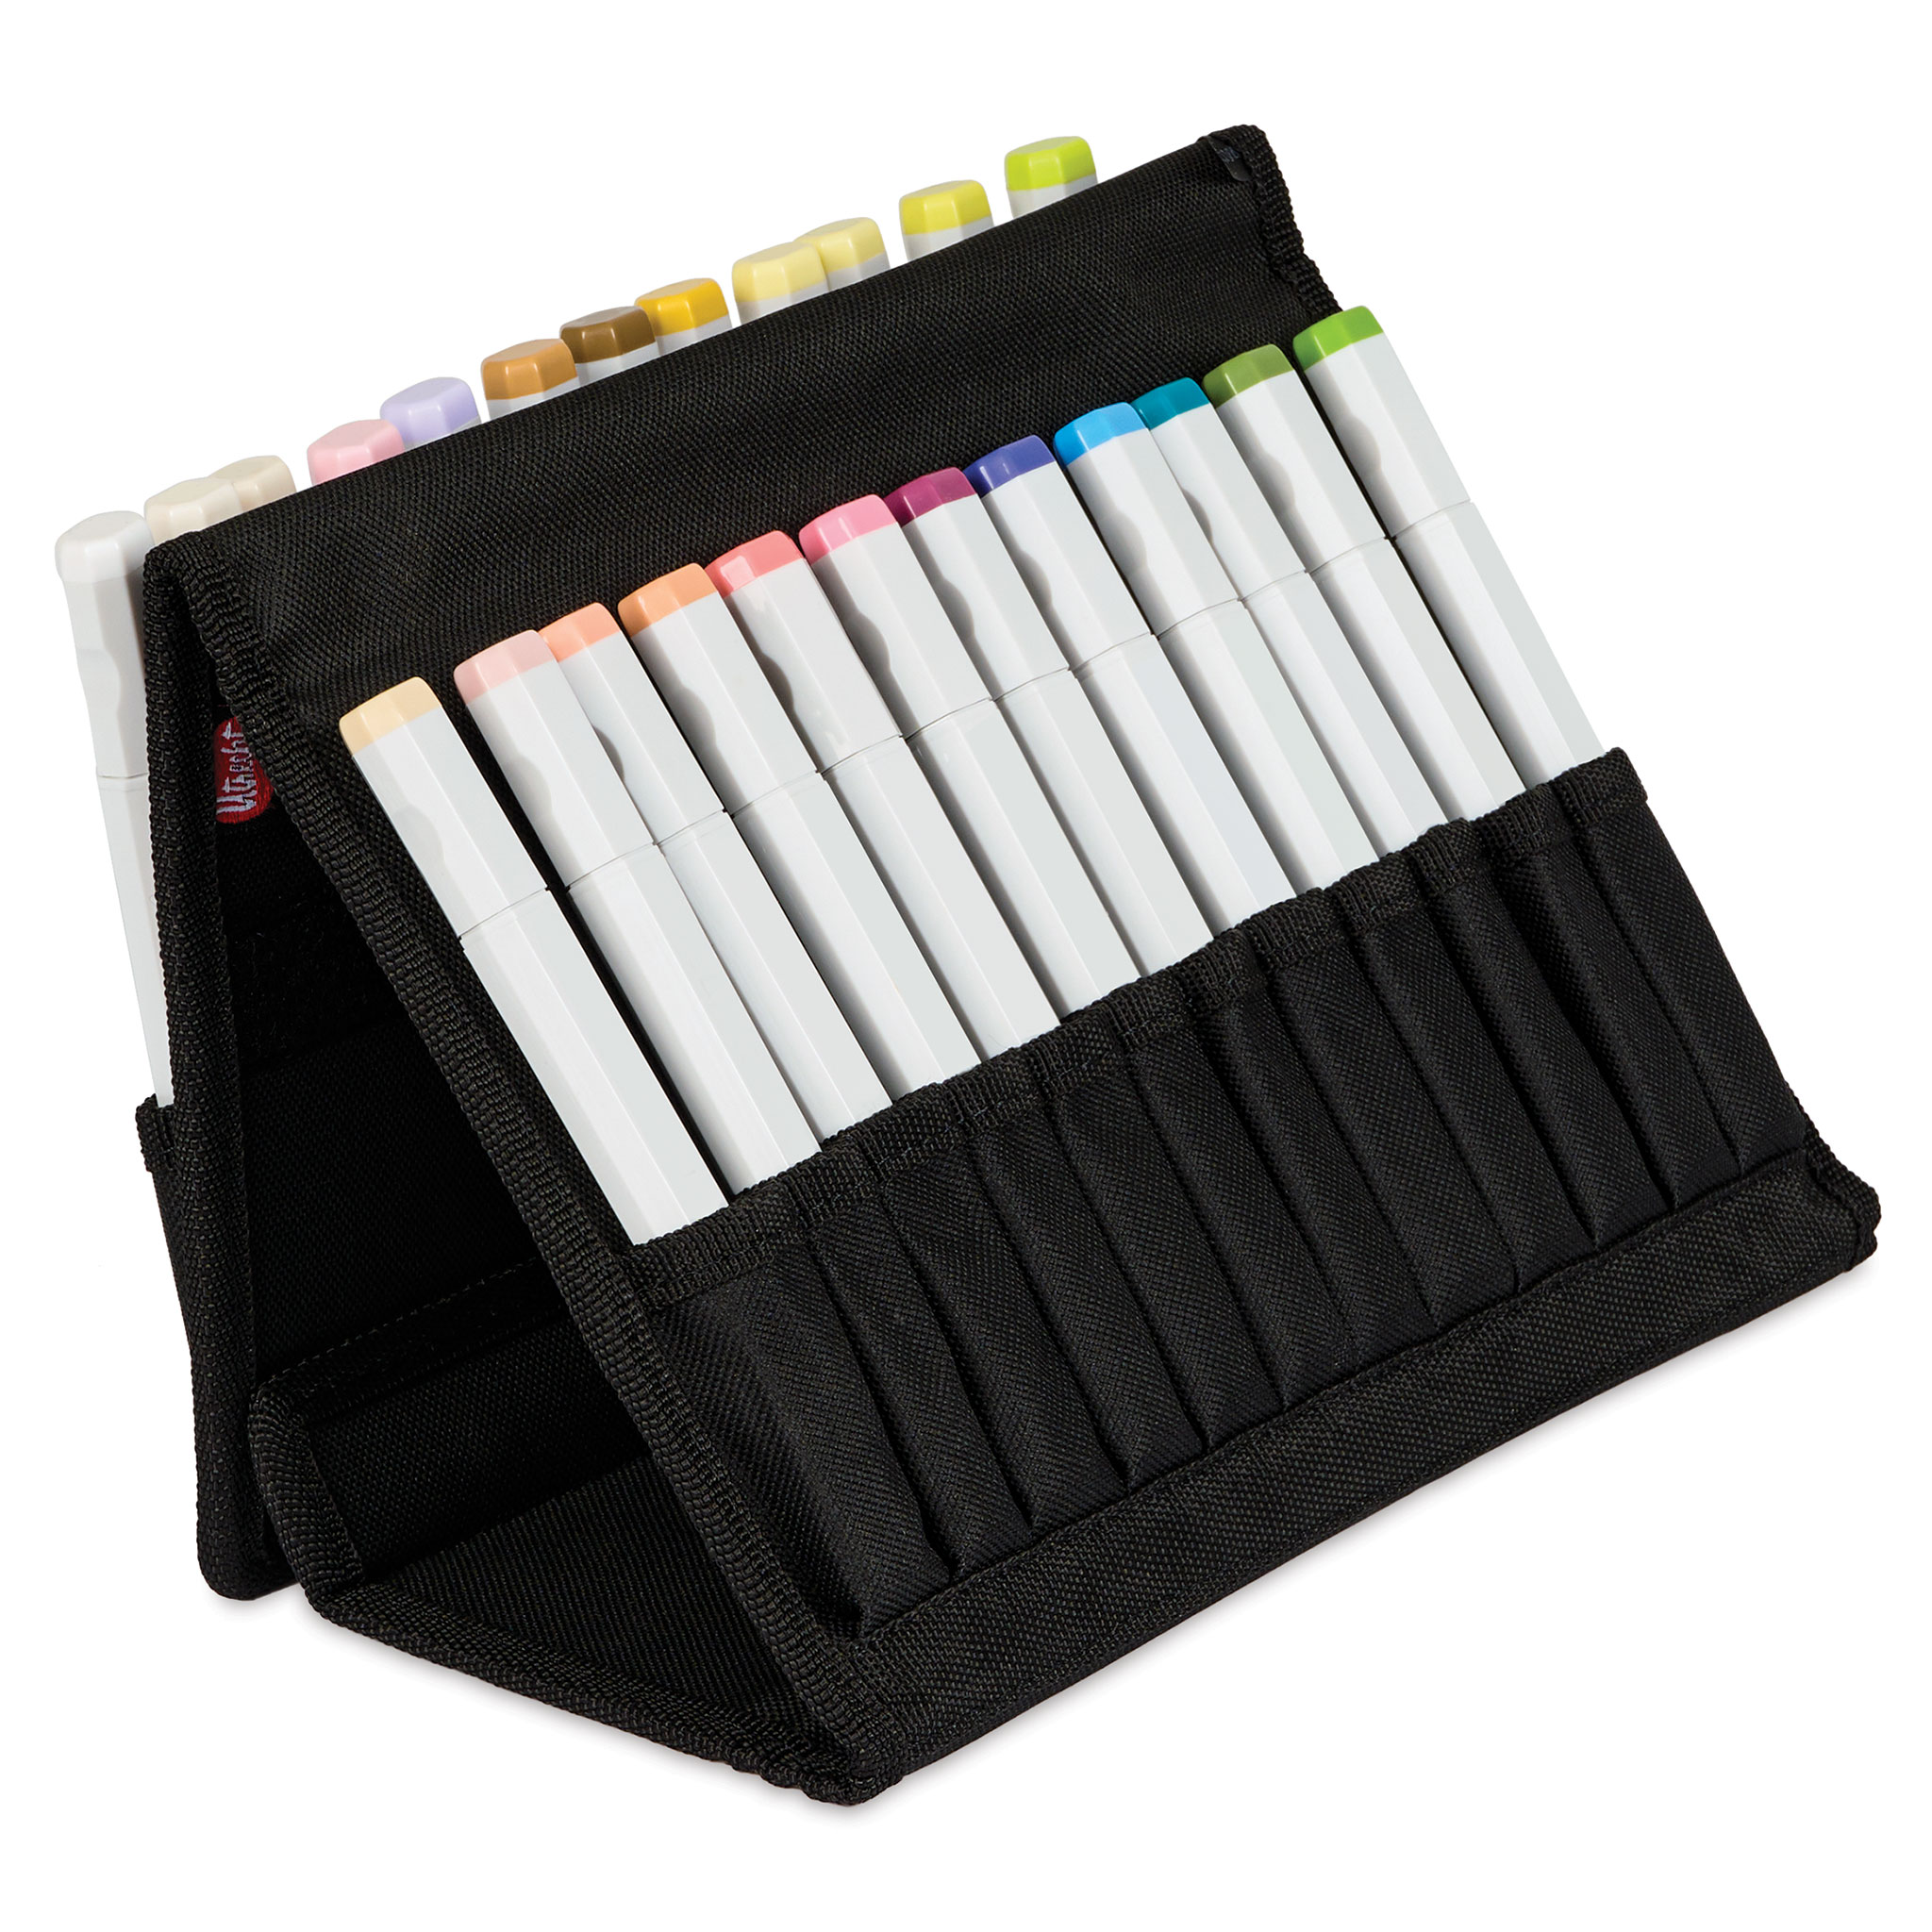 Marker Case with 144 Slots